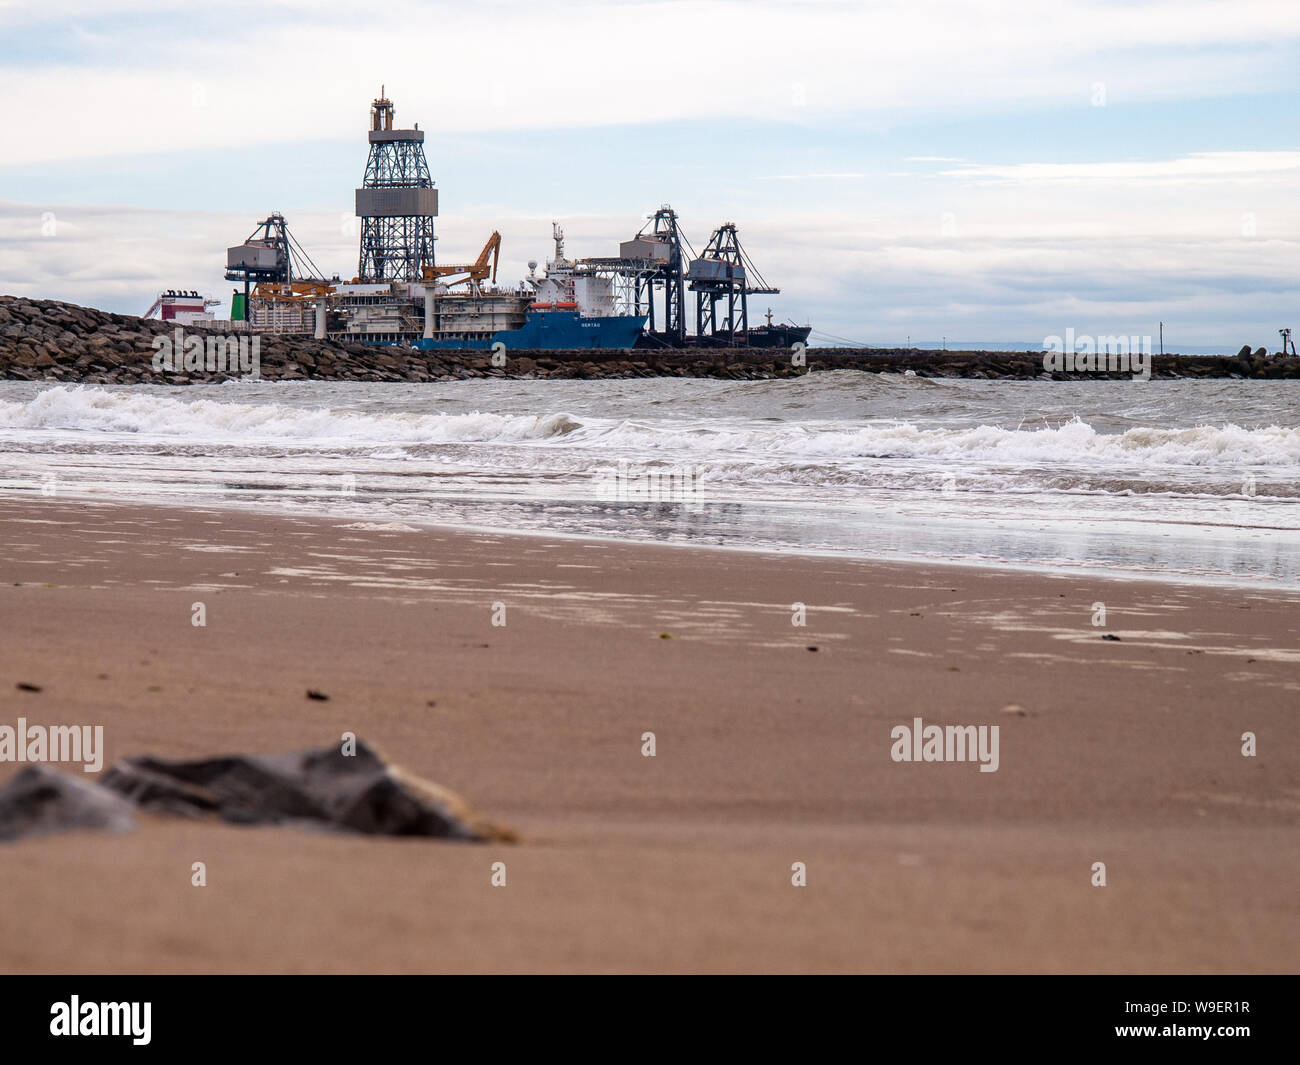 The huge deep water drilling vessel Sertao moored up at dock in Port Talbot in South Wales. UK. Stock Photo